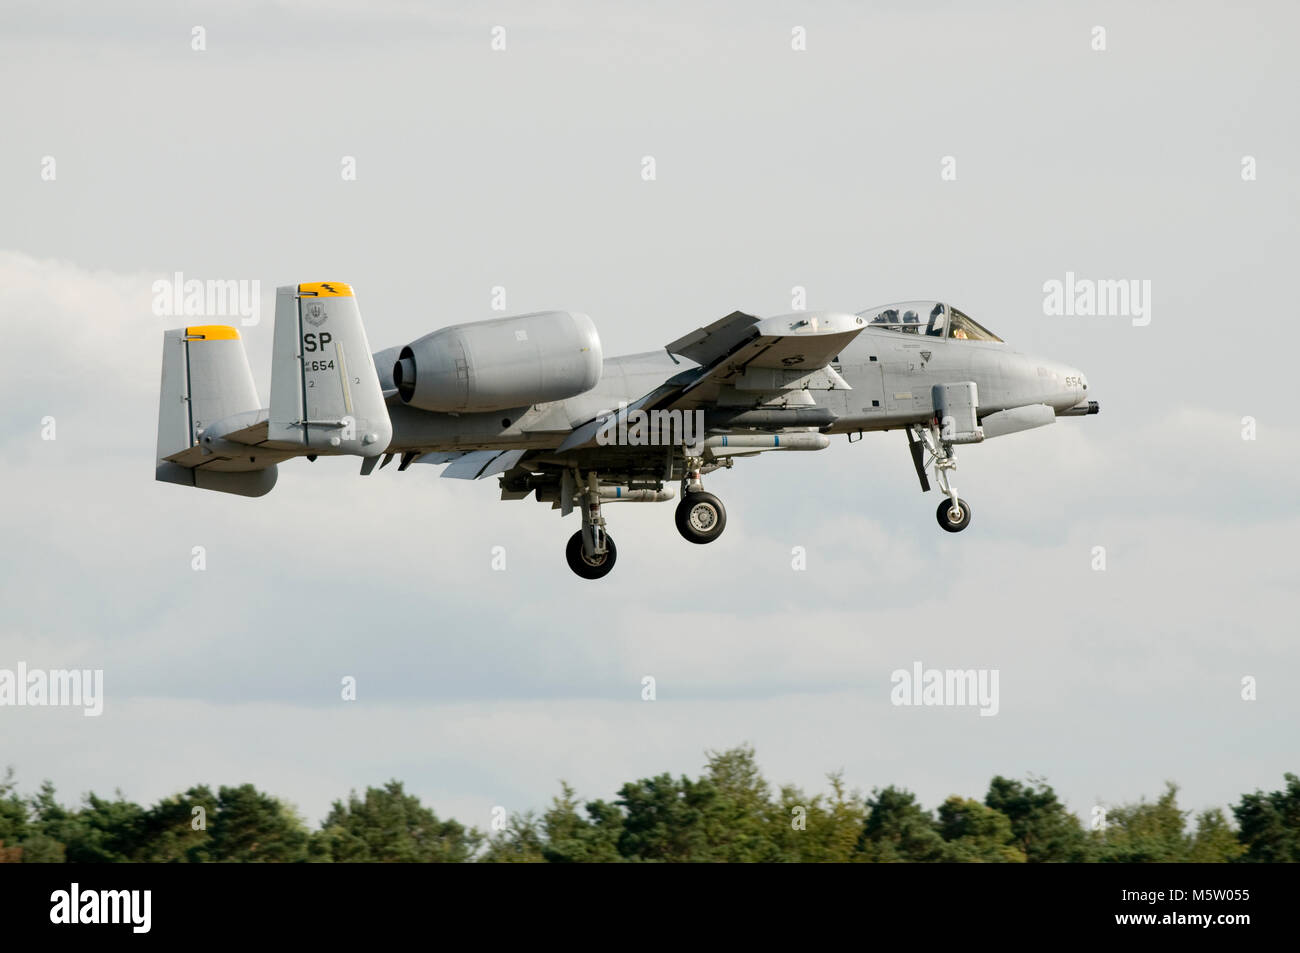 Fairchild Republic A-10C Warthog, 82-0654, of the 81st FS, 52nd FW, USAFE, based at Spangdahlem AB, Germany, seen on final approach to RAF Lakenheath Stock Photo